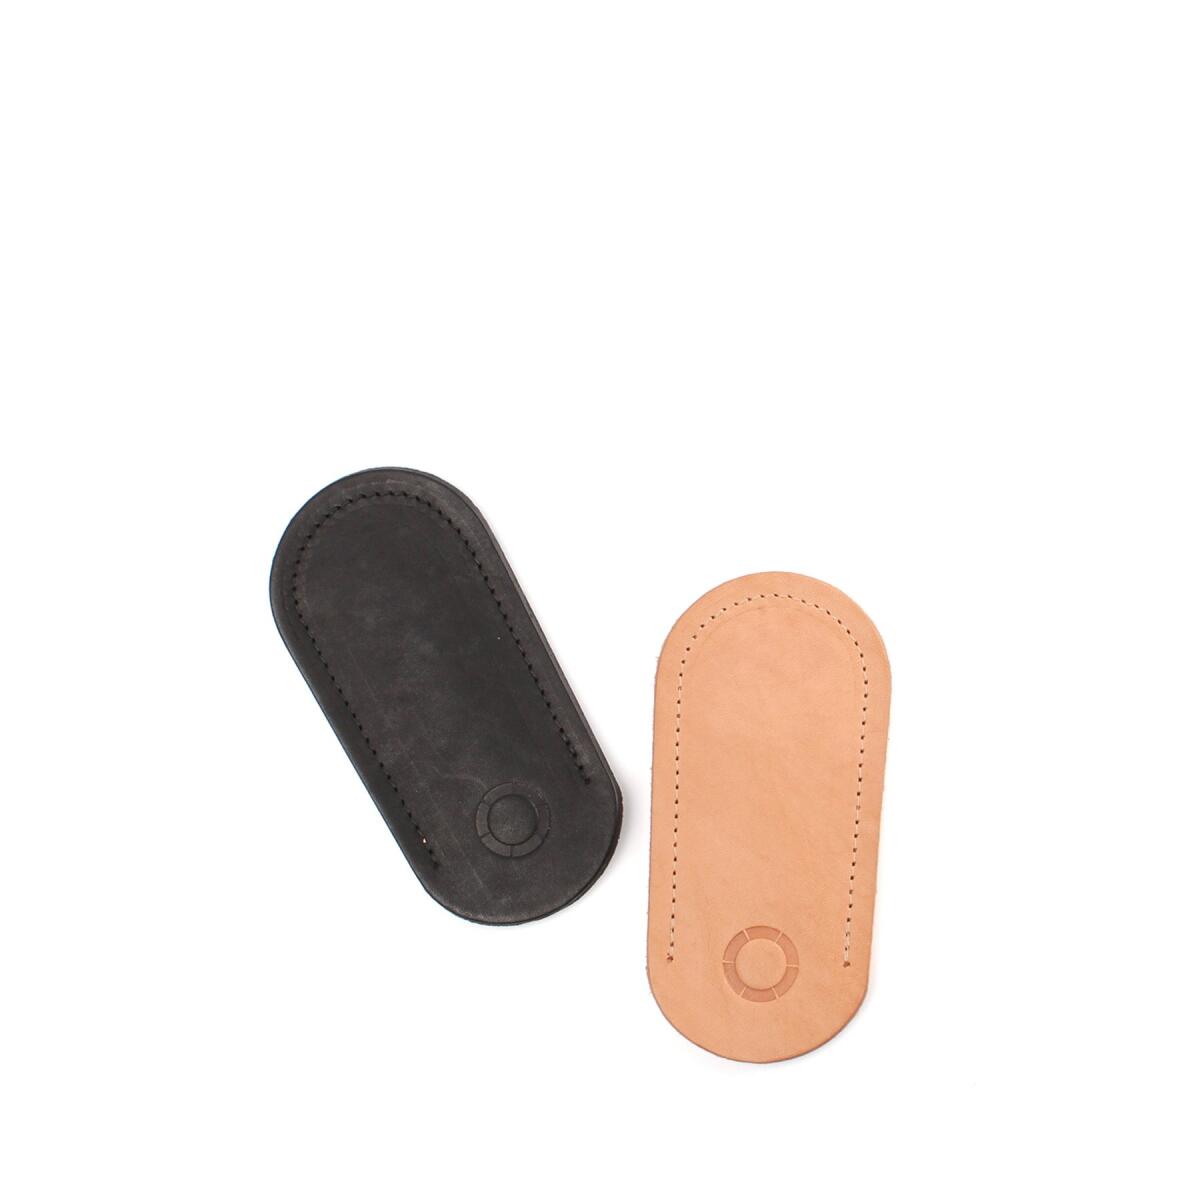 John Cho Moore's leather cast-iron grip comes in black or tan.